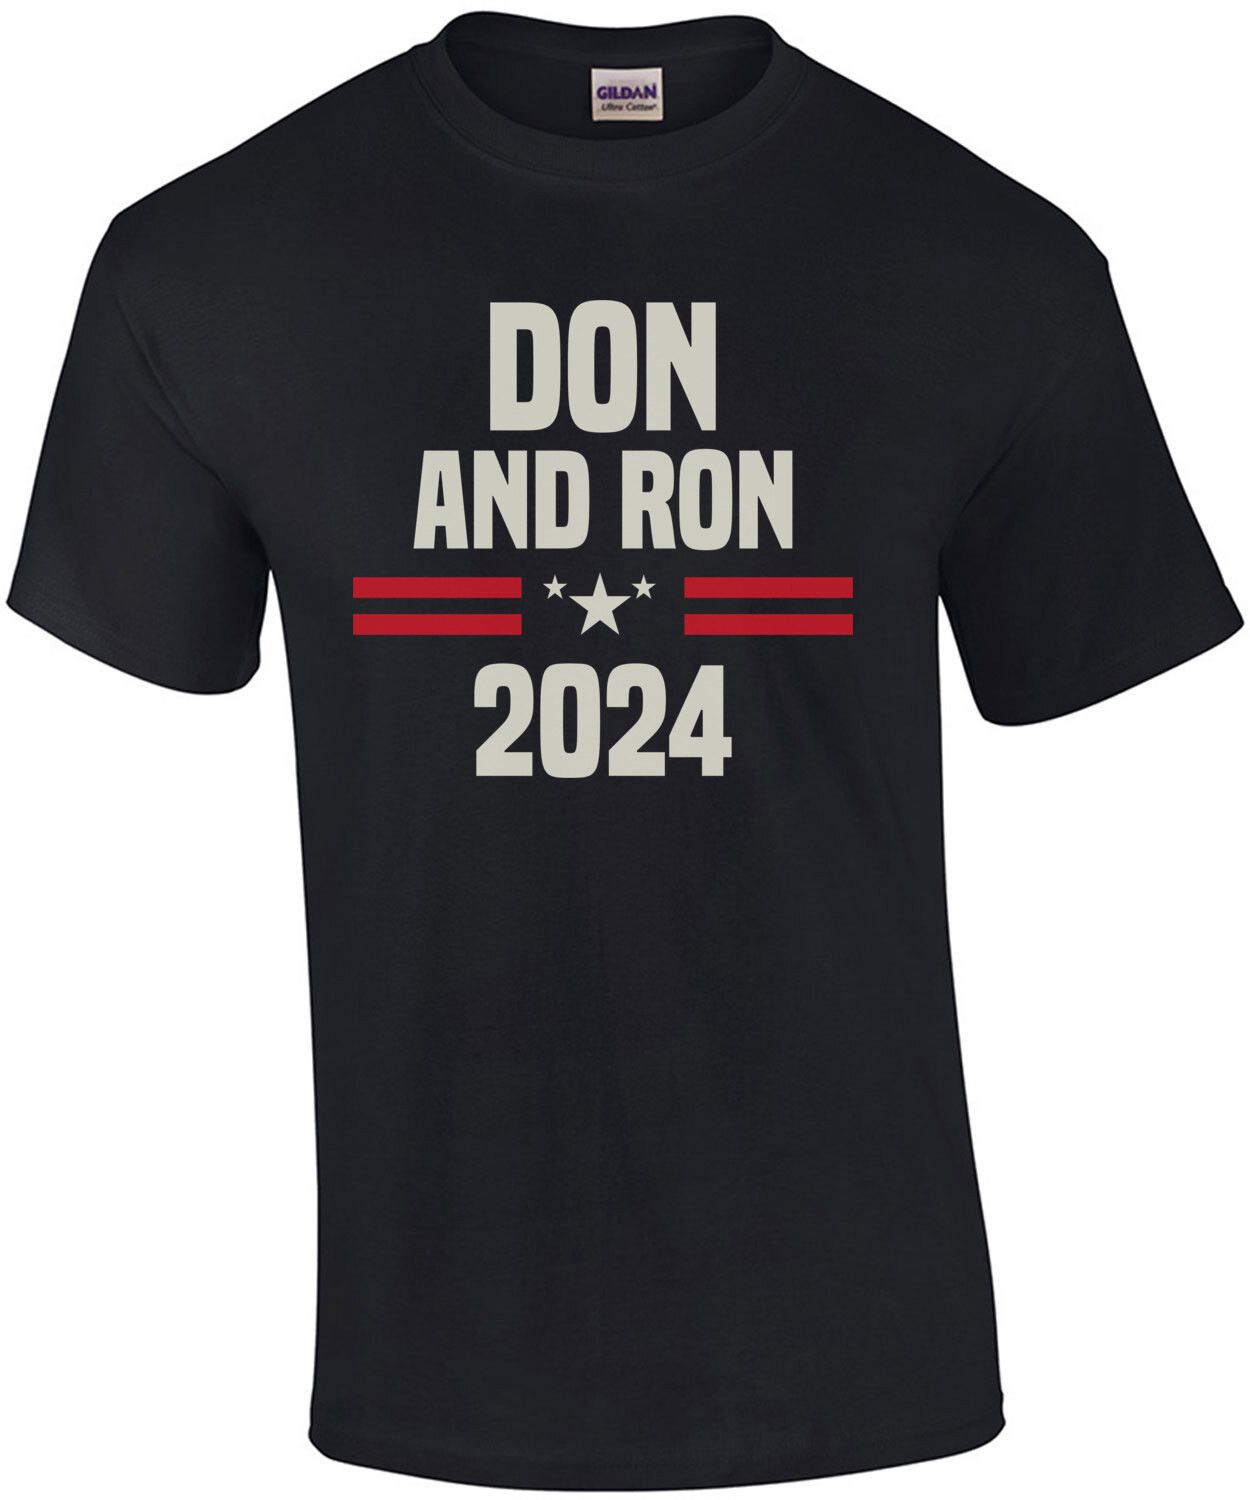 Don and Ron 2024 T-Shirt